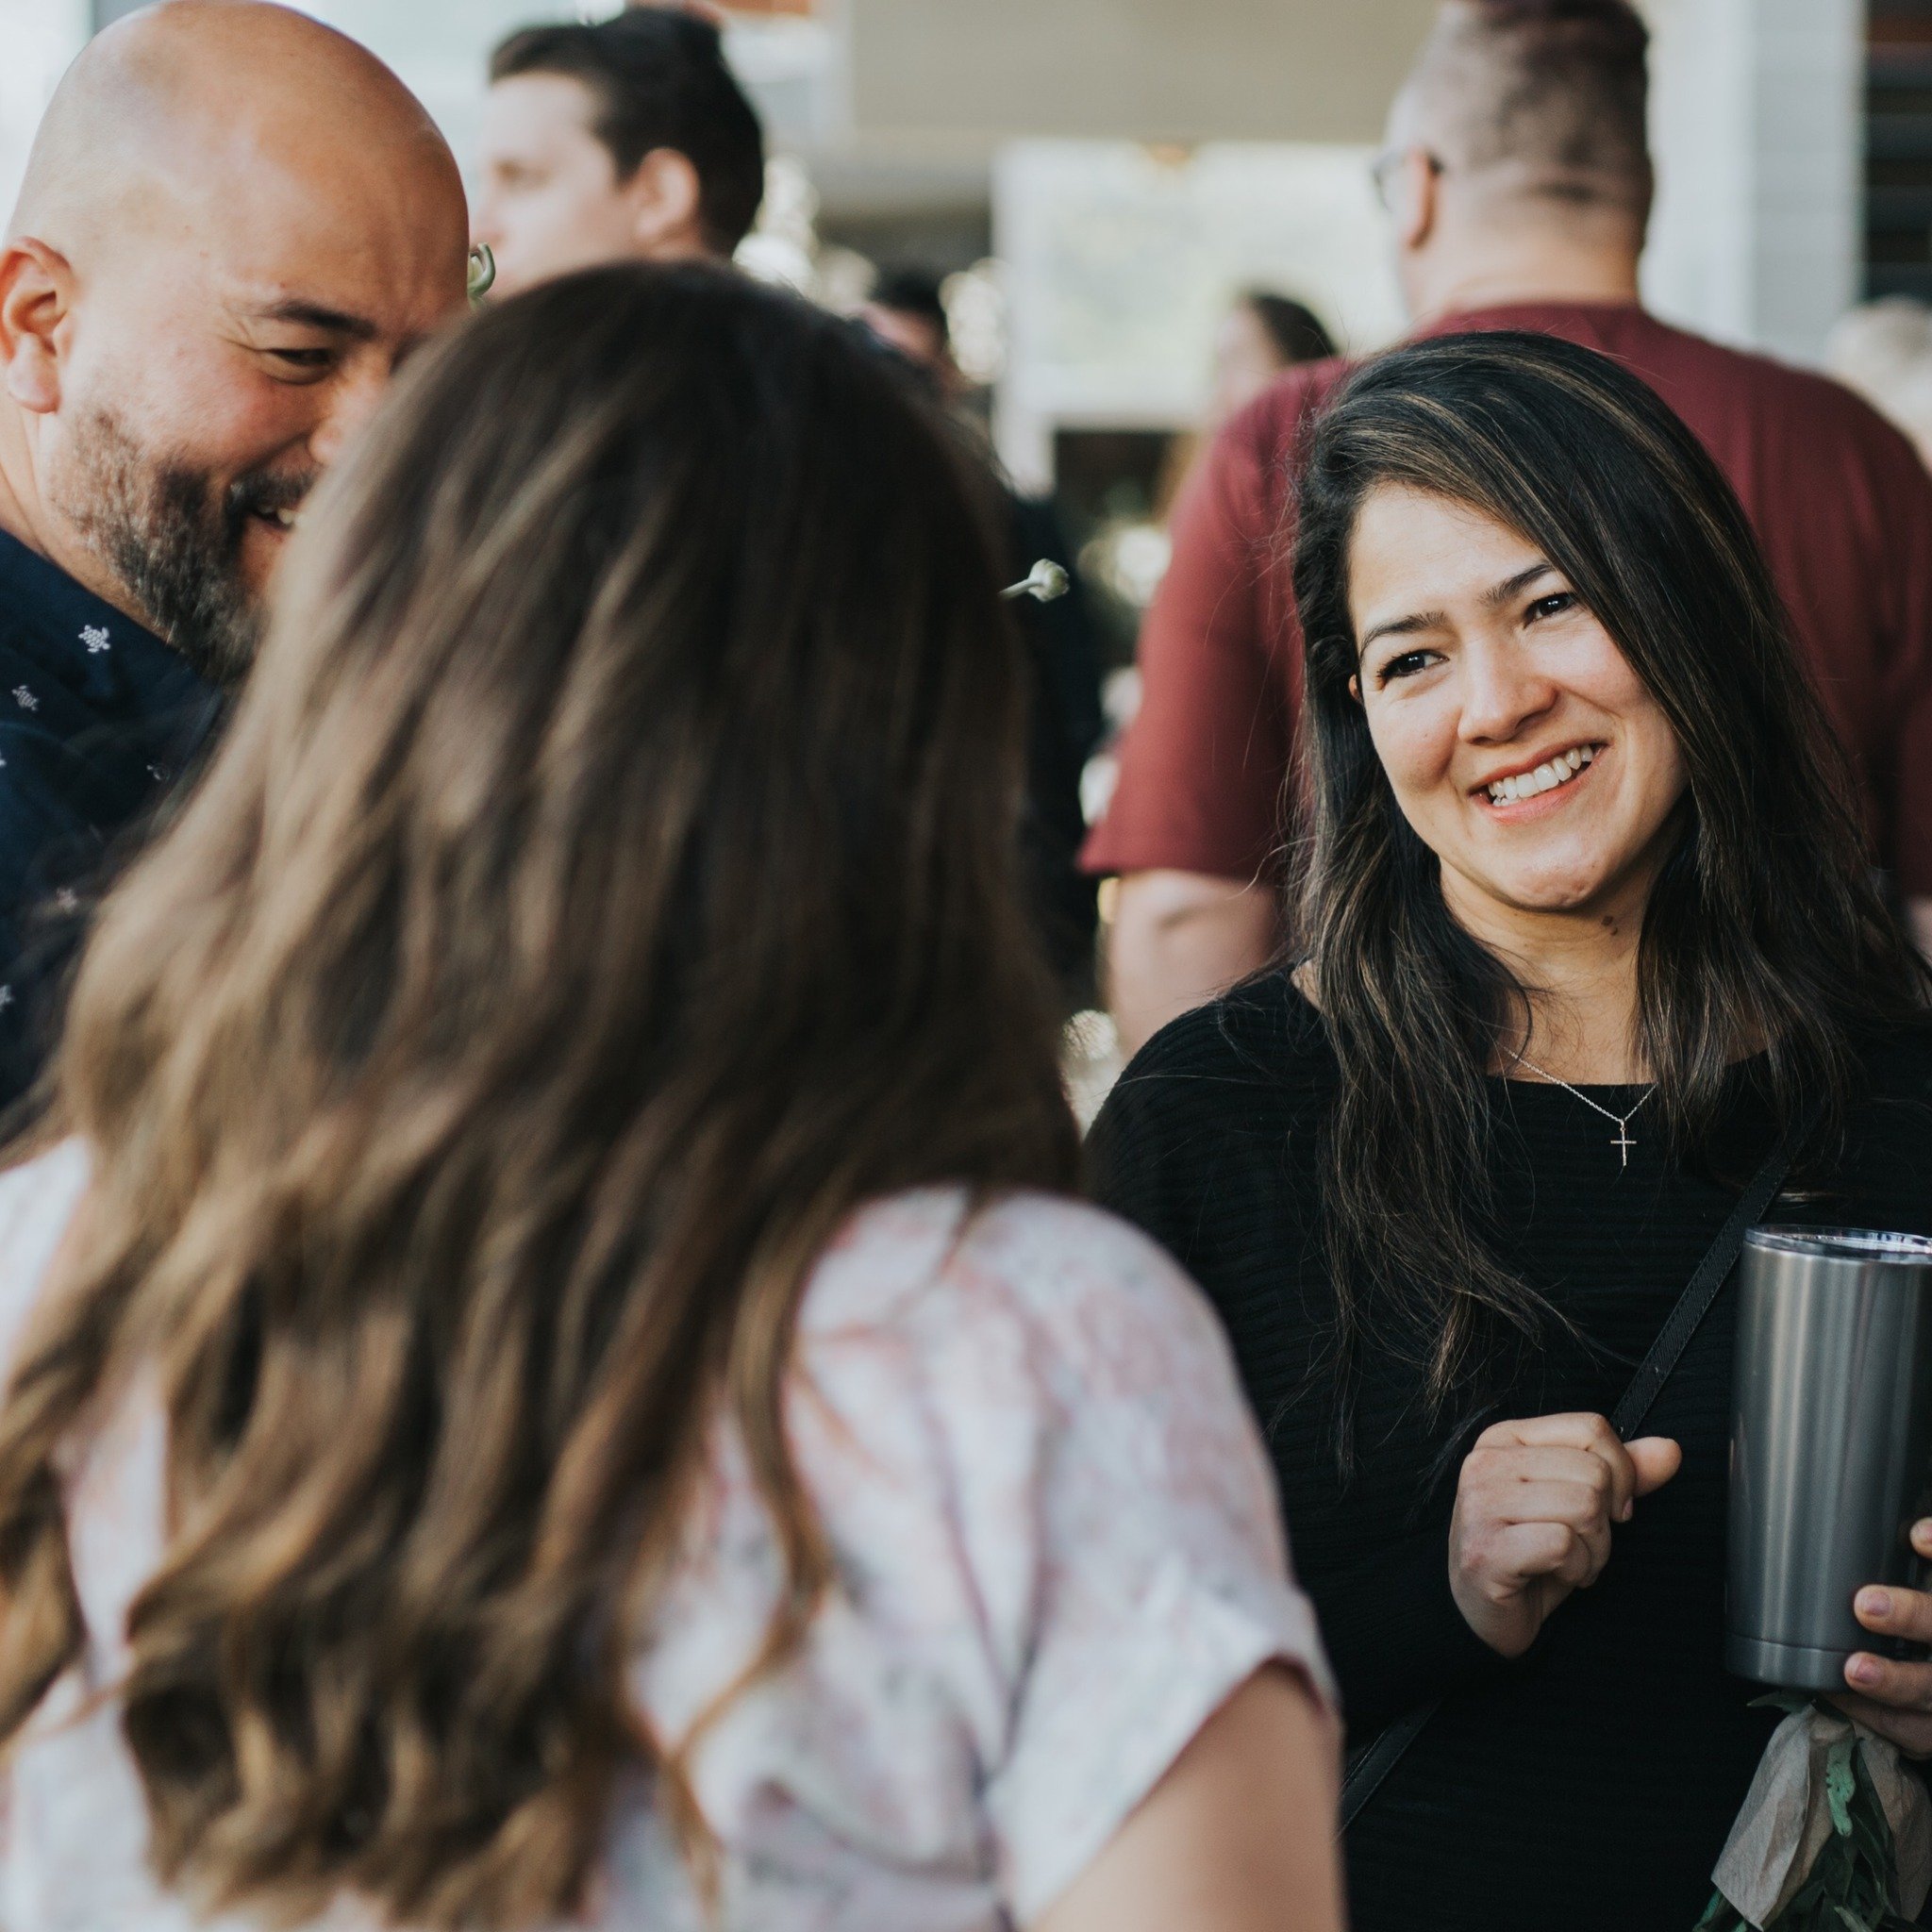 We can&rsquo;t wait to worship together on Sunday - see you at 10am at the Evergreen Theatre!

#coquitlamchurch #faithincoquitlam #towncentrechurch #cachurch #jesusincoquitlam #christianscoquitlam #coquitlam #tricities